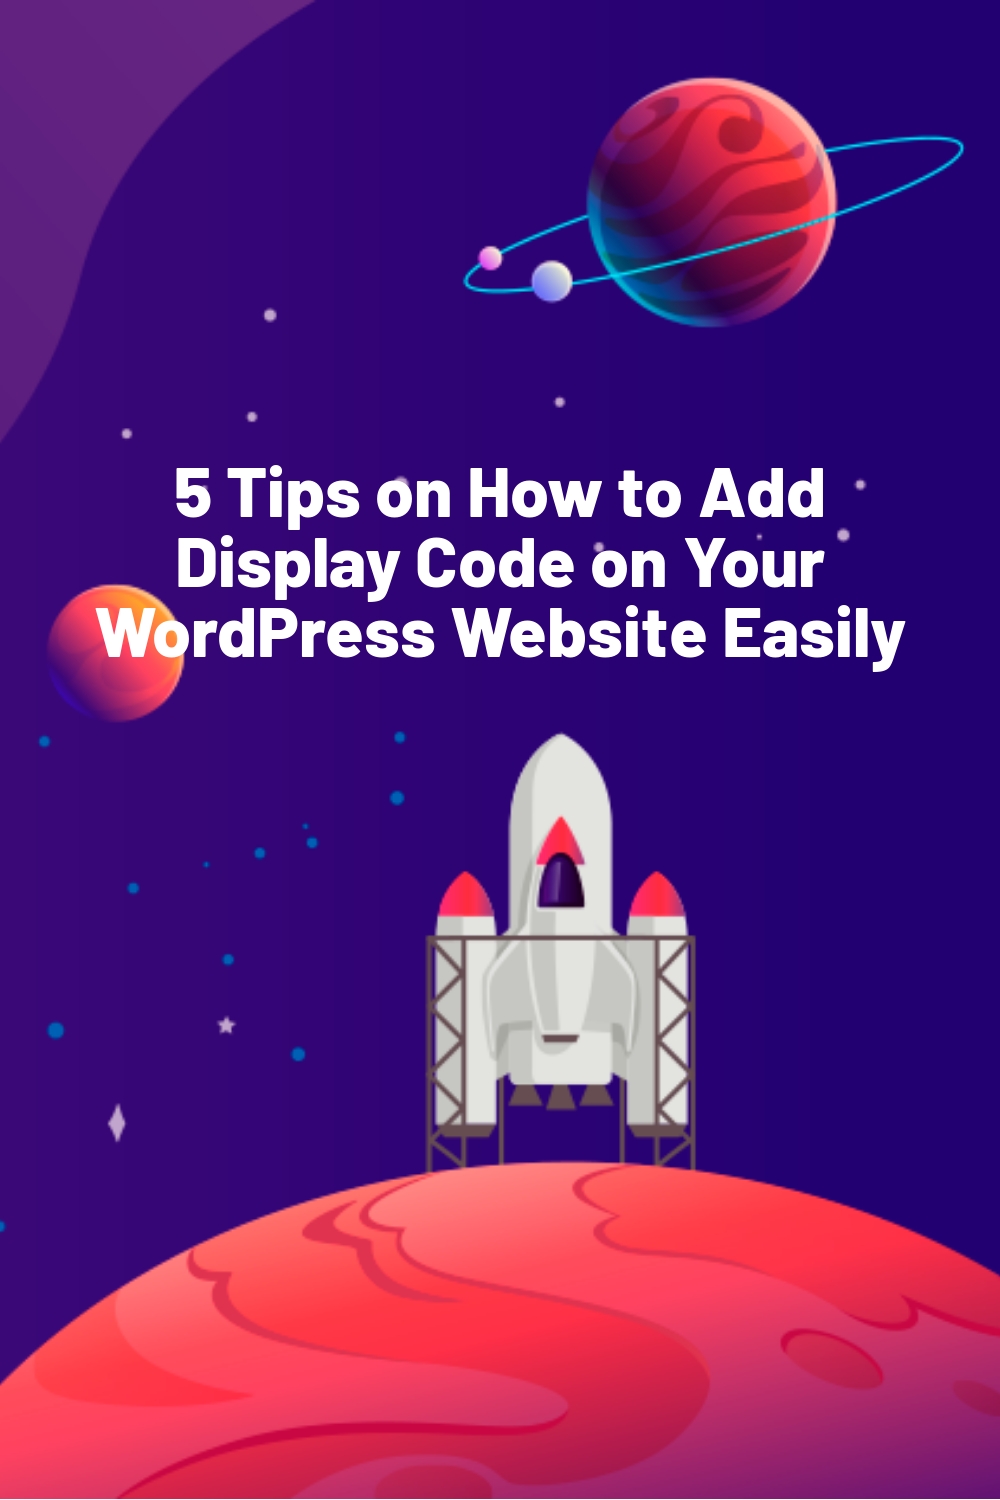 5 Tips on How to Add Display Code on Your WordPress Website Easily